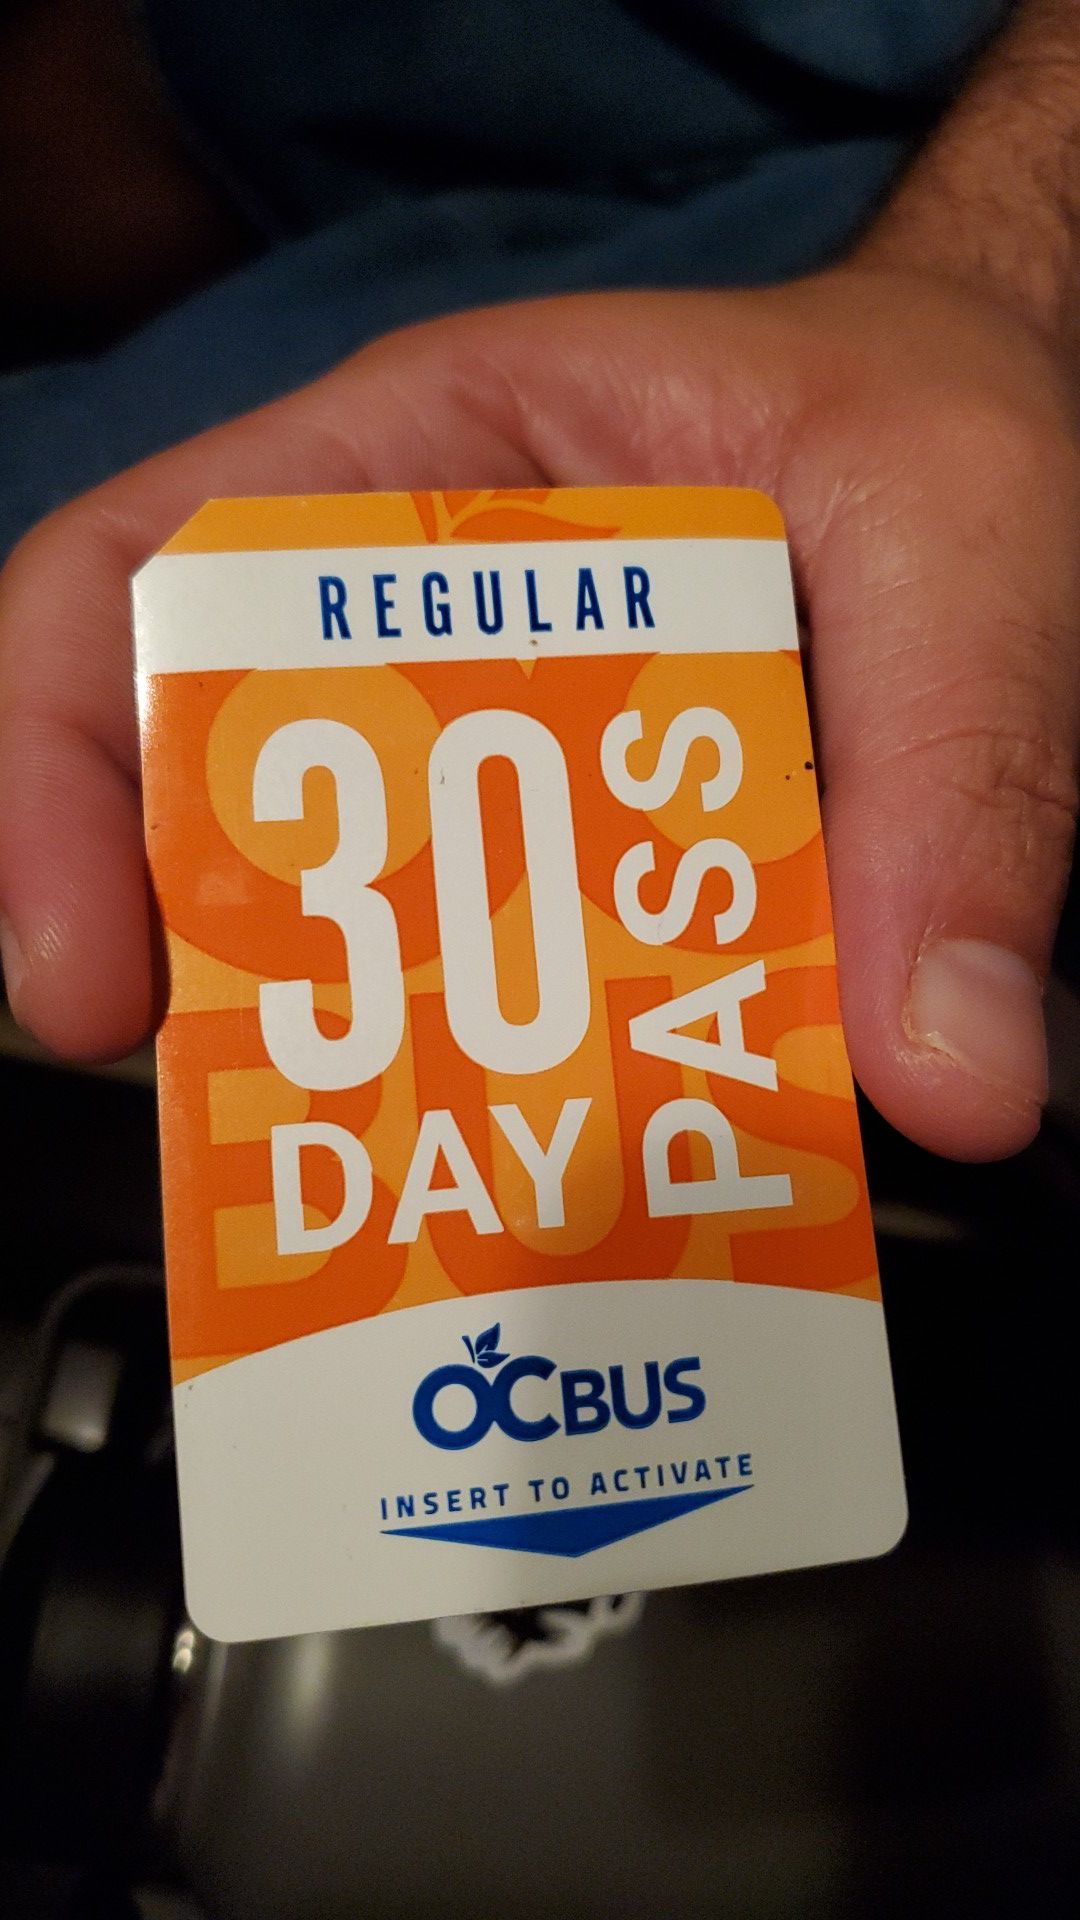 30 day bus pass